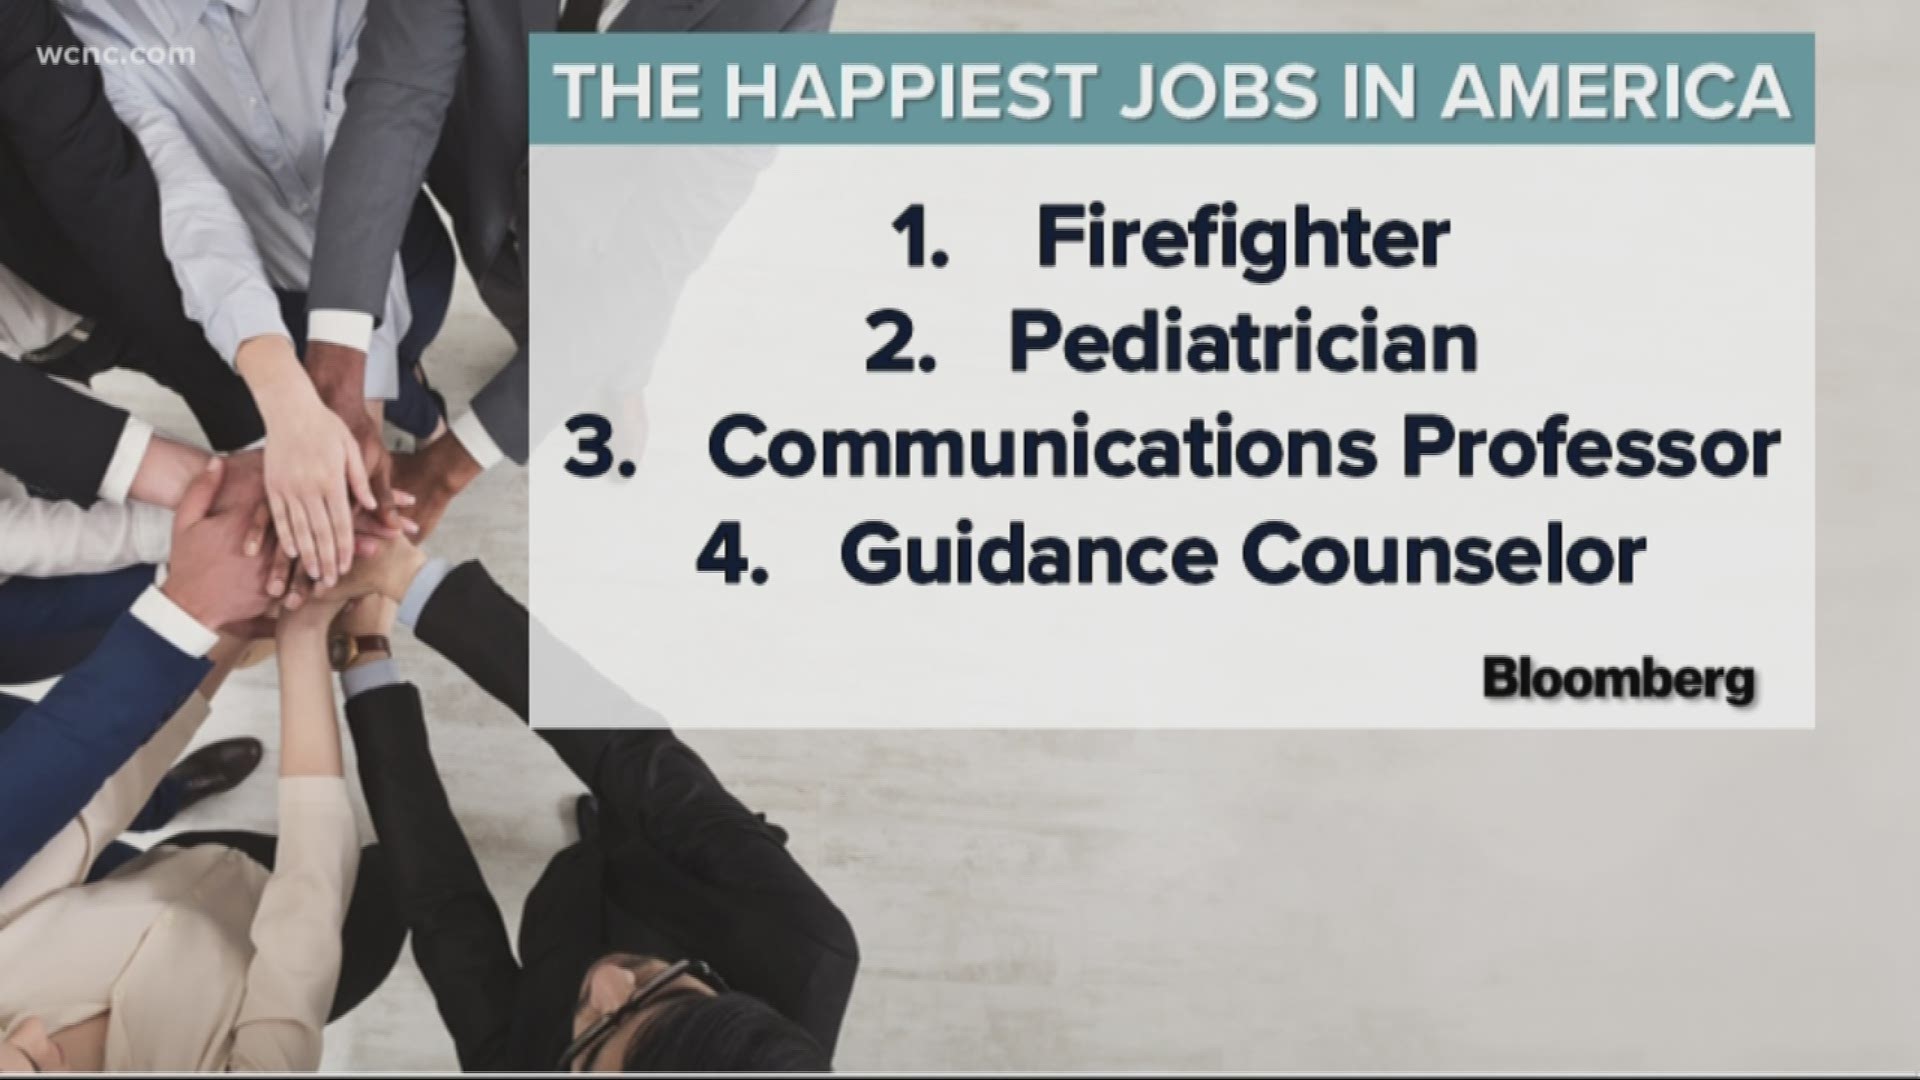 According to a new Bloomberg survey, firefighters have the highest job satisfaction of all workers in America. The unhappiest include house cleaners and those dreaded telemarketers.